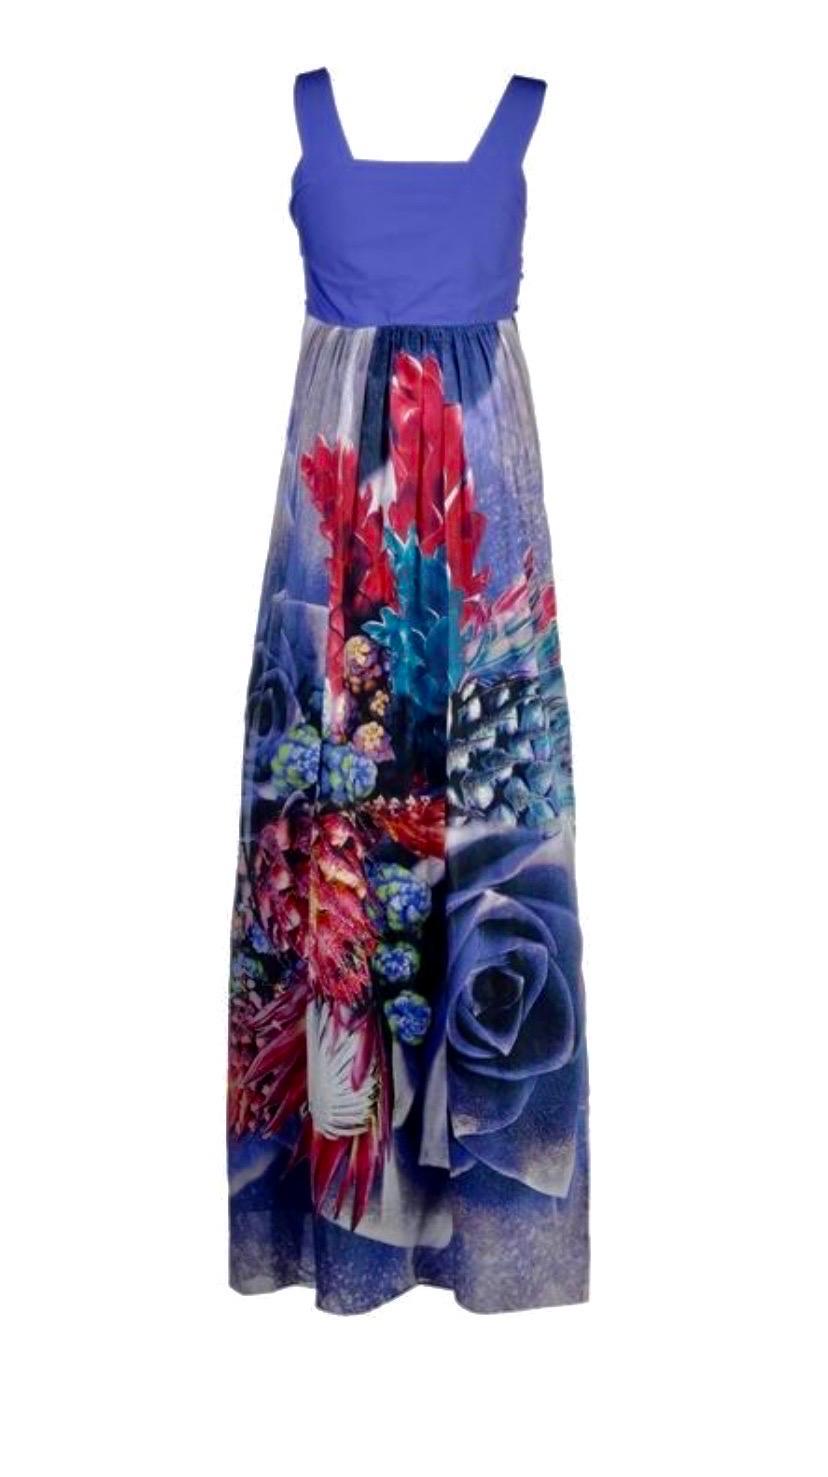 New Roberto Cavalli Embellished Floral Print Long Dress
It size 42 - US 6
The amazing dress is crafted from 100% cotton and beautifully embellished.
Gorgeous floral print, Fully lined, Side zip closure.
Measurements: Length - 63 inches, Bust - 32